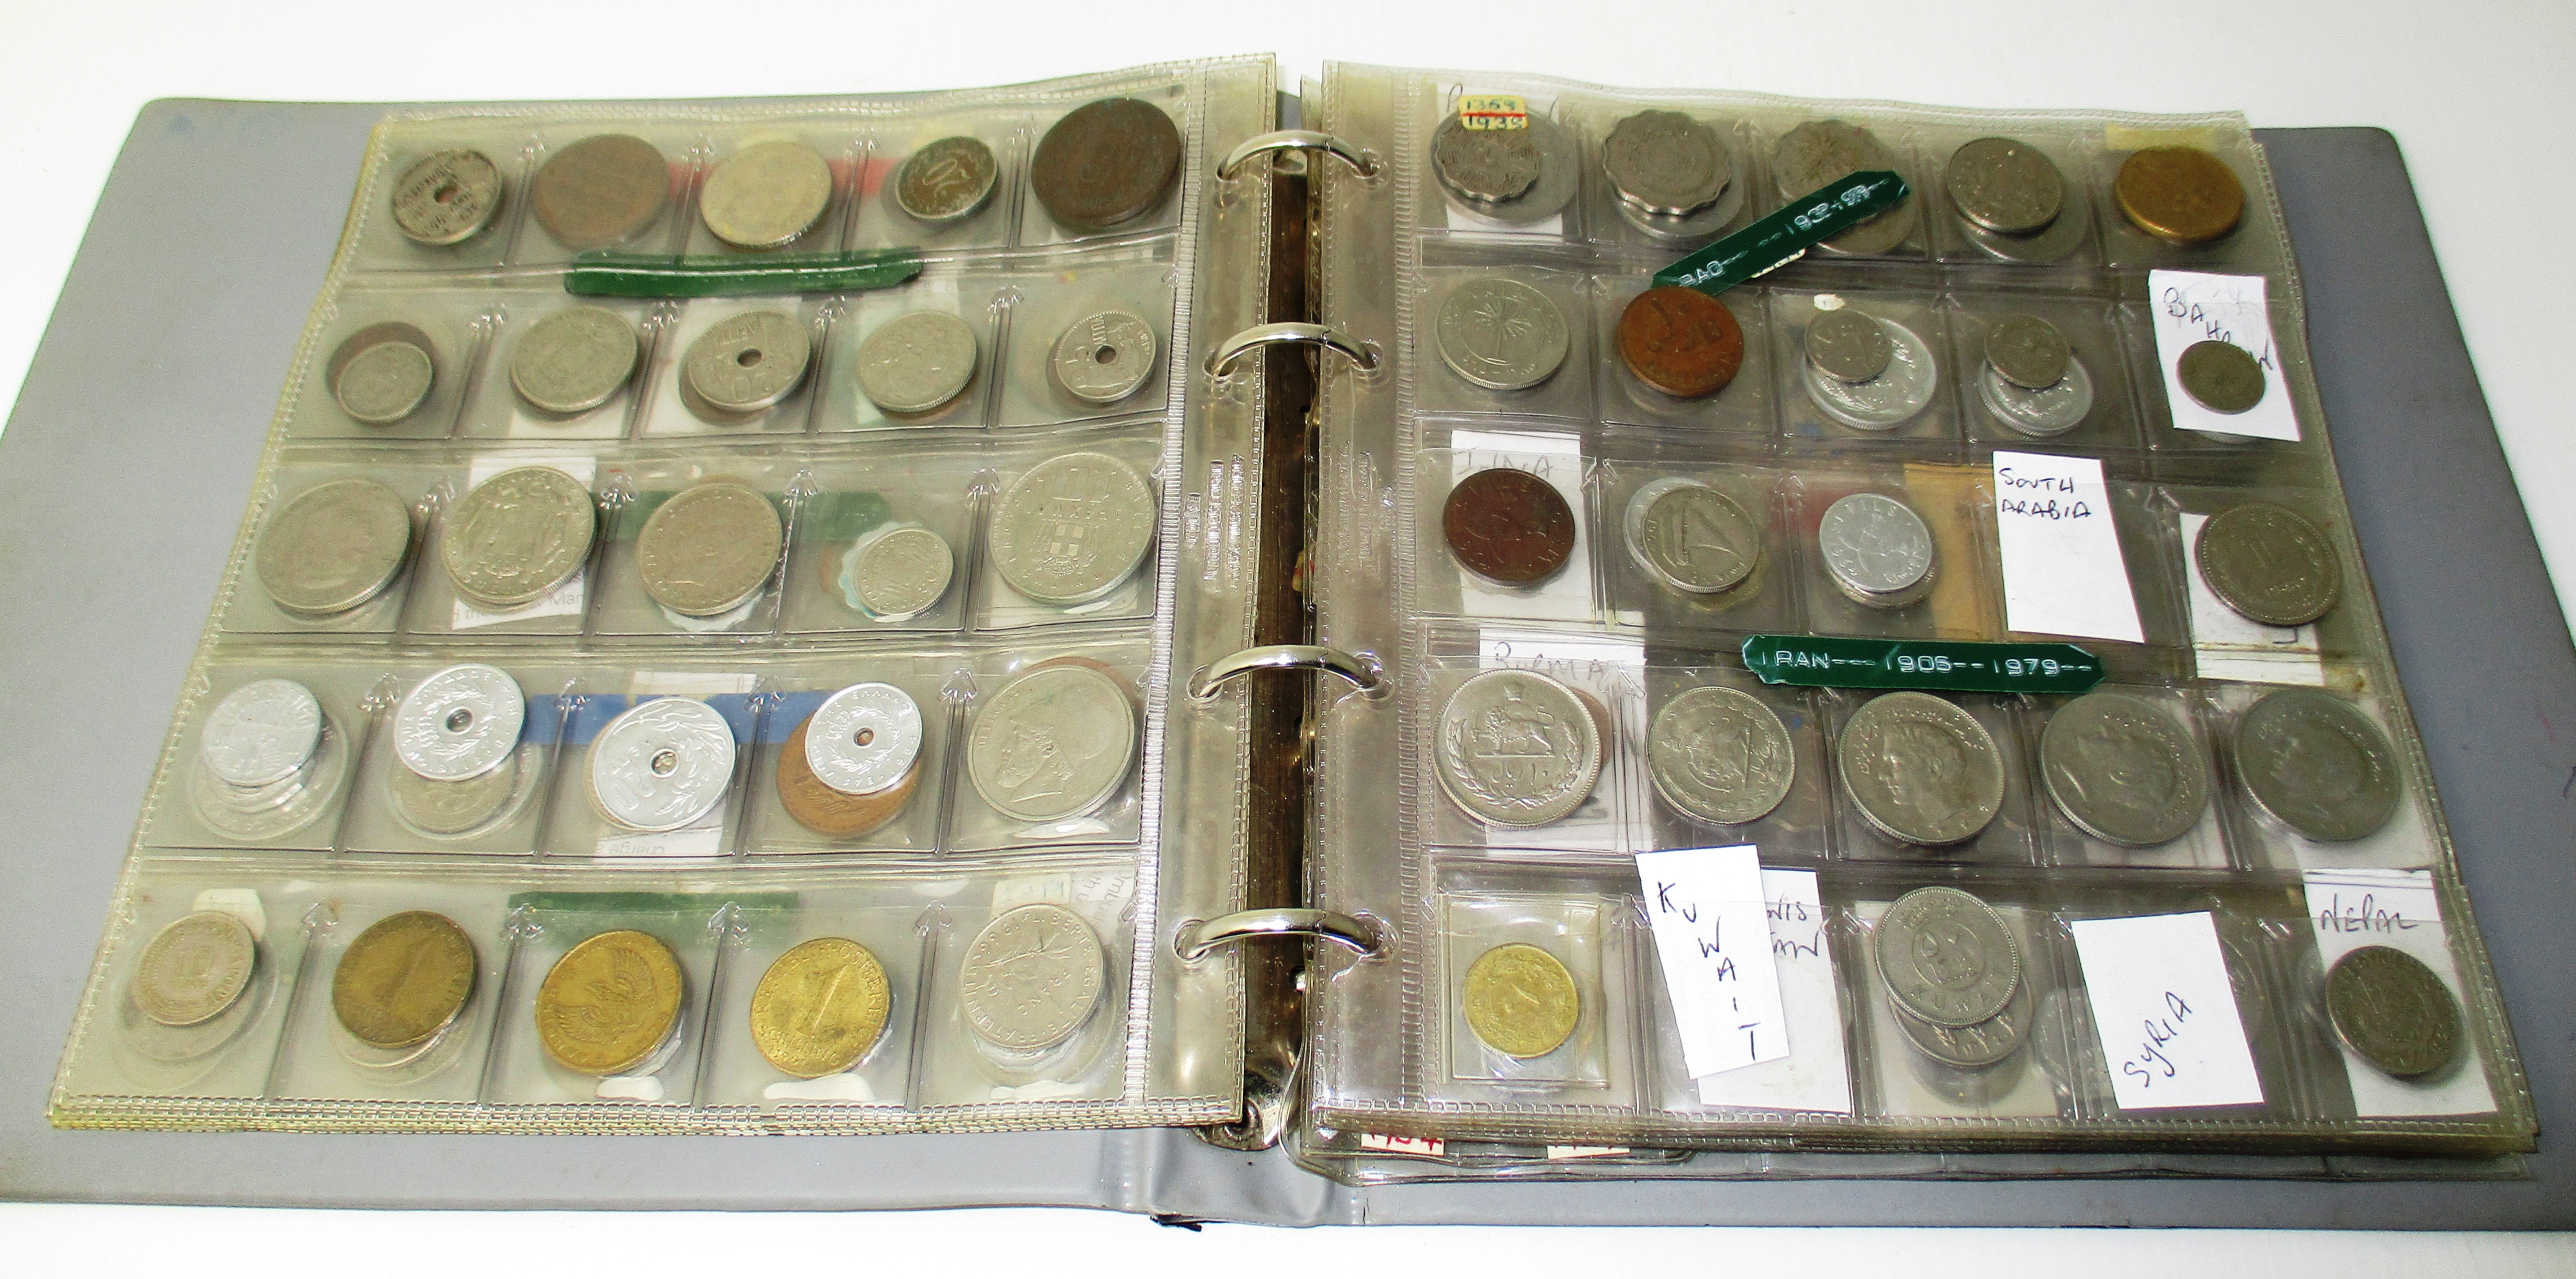 Coin album of over 300 world coins including Africa and Middle East includes several unc.